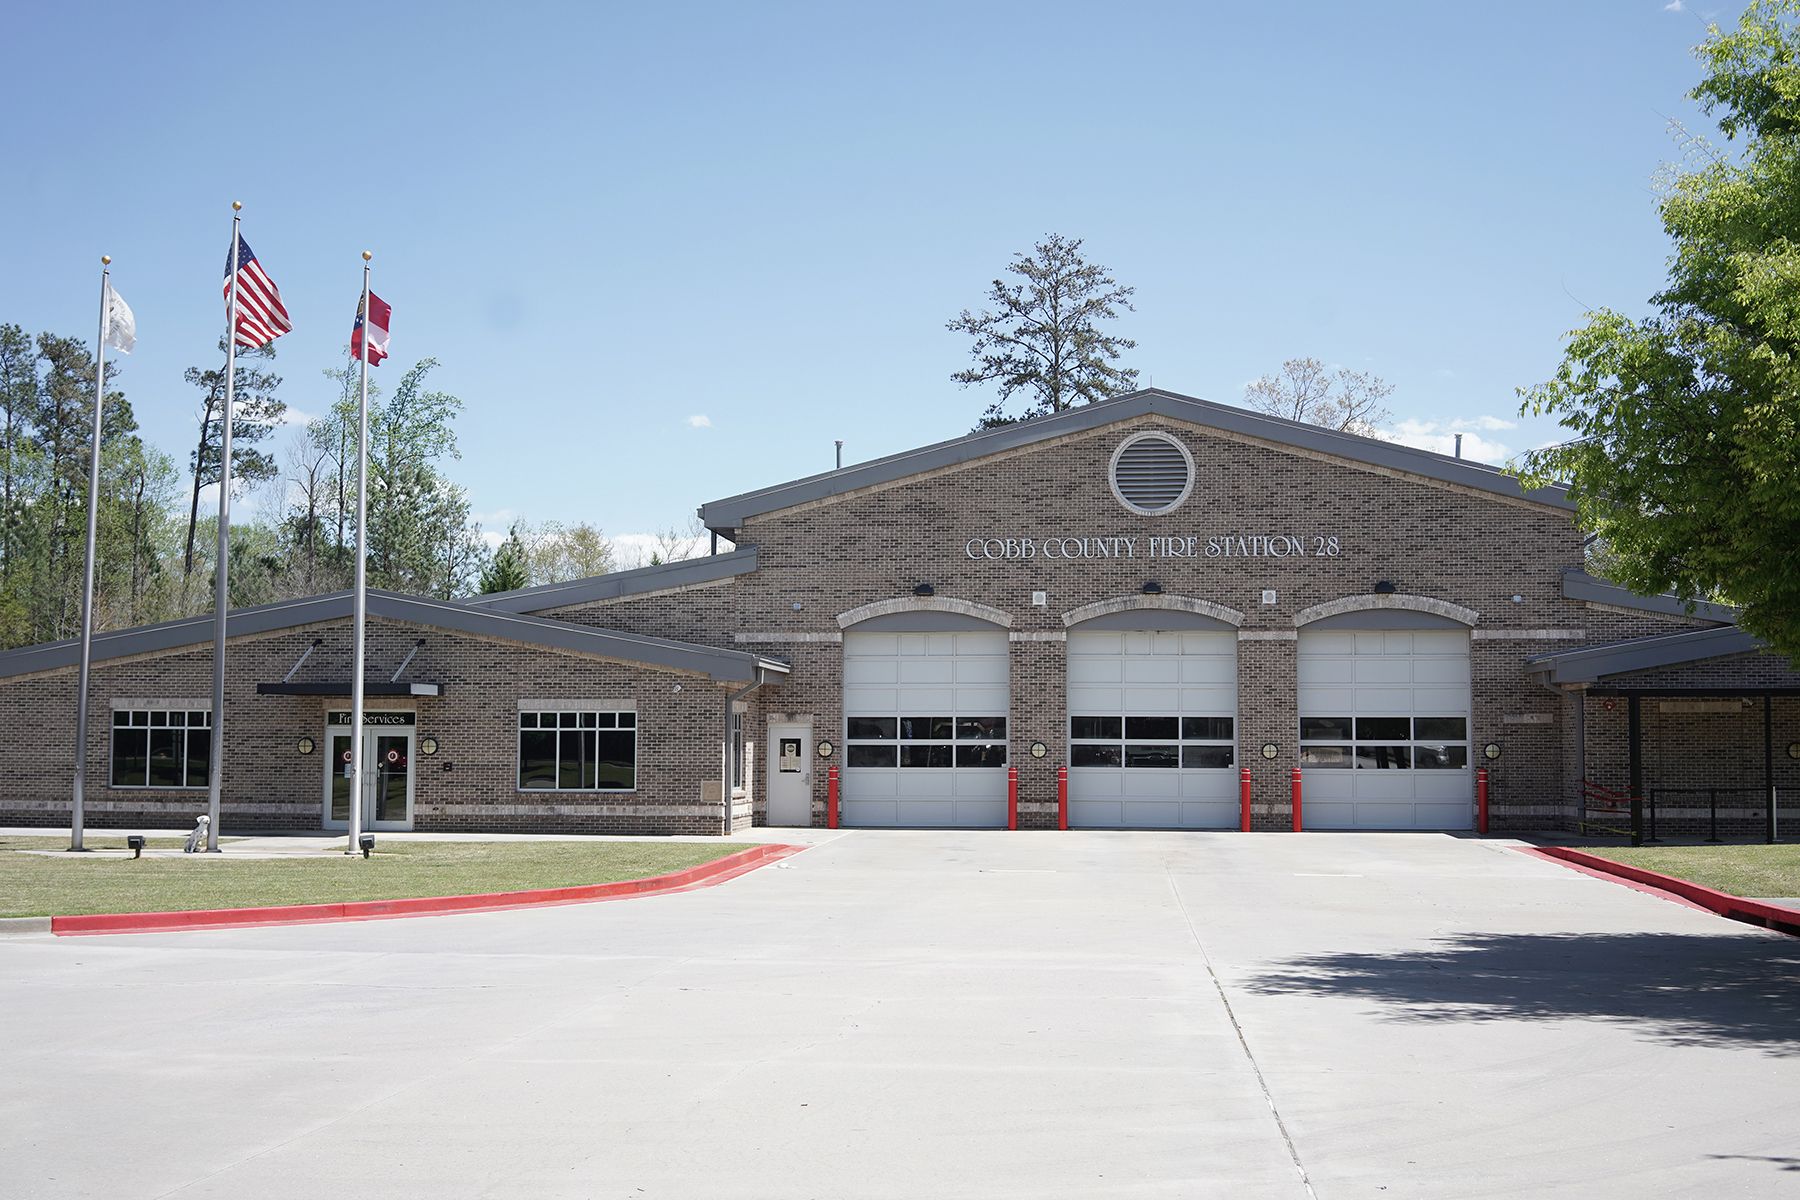 Outside of Fire Station 28